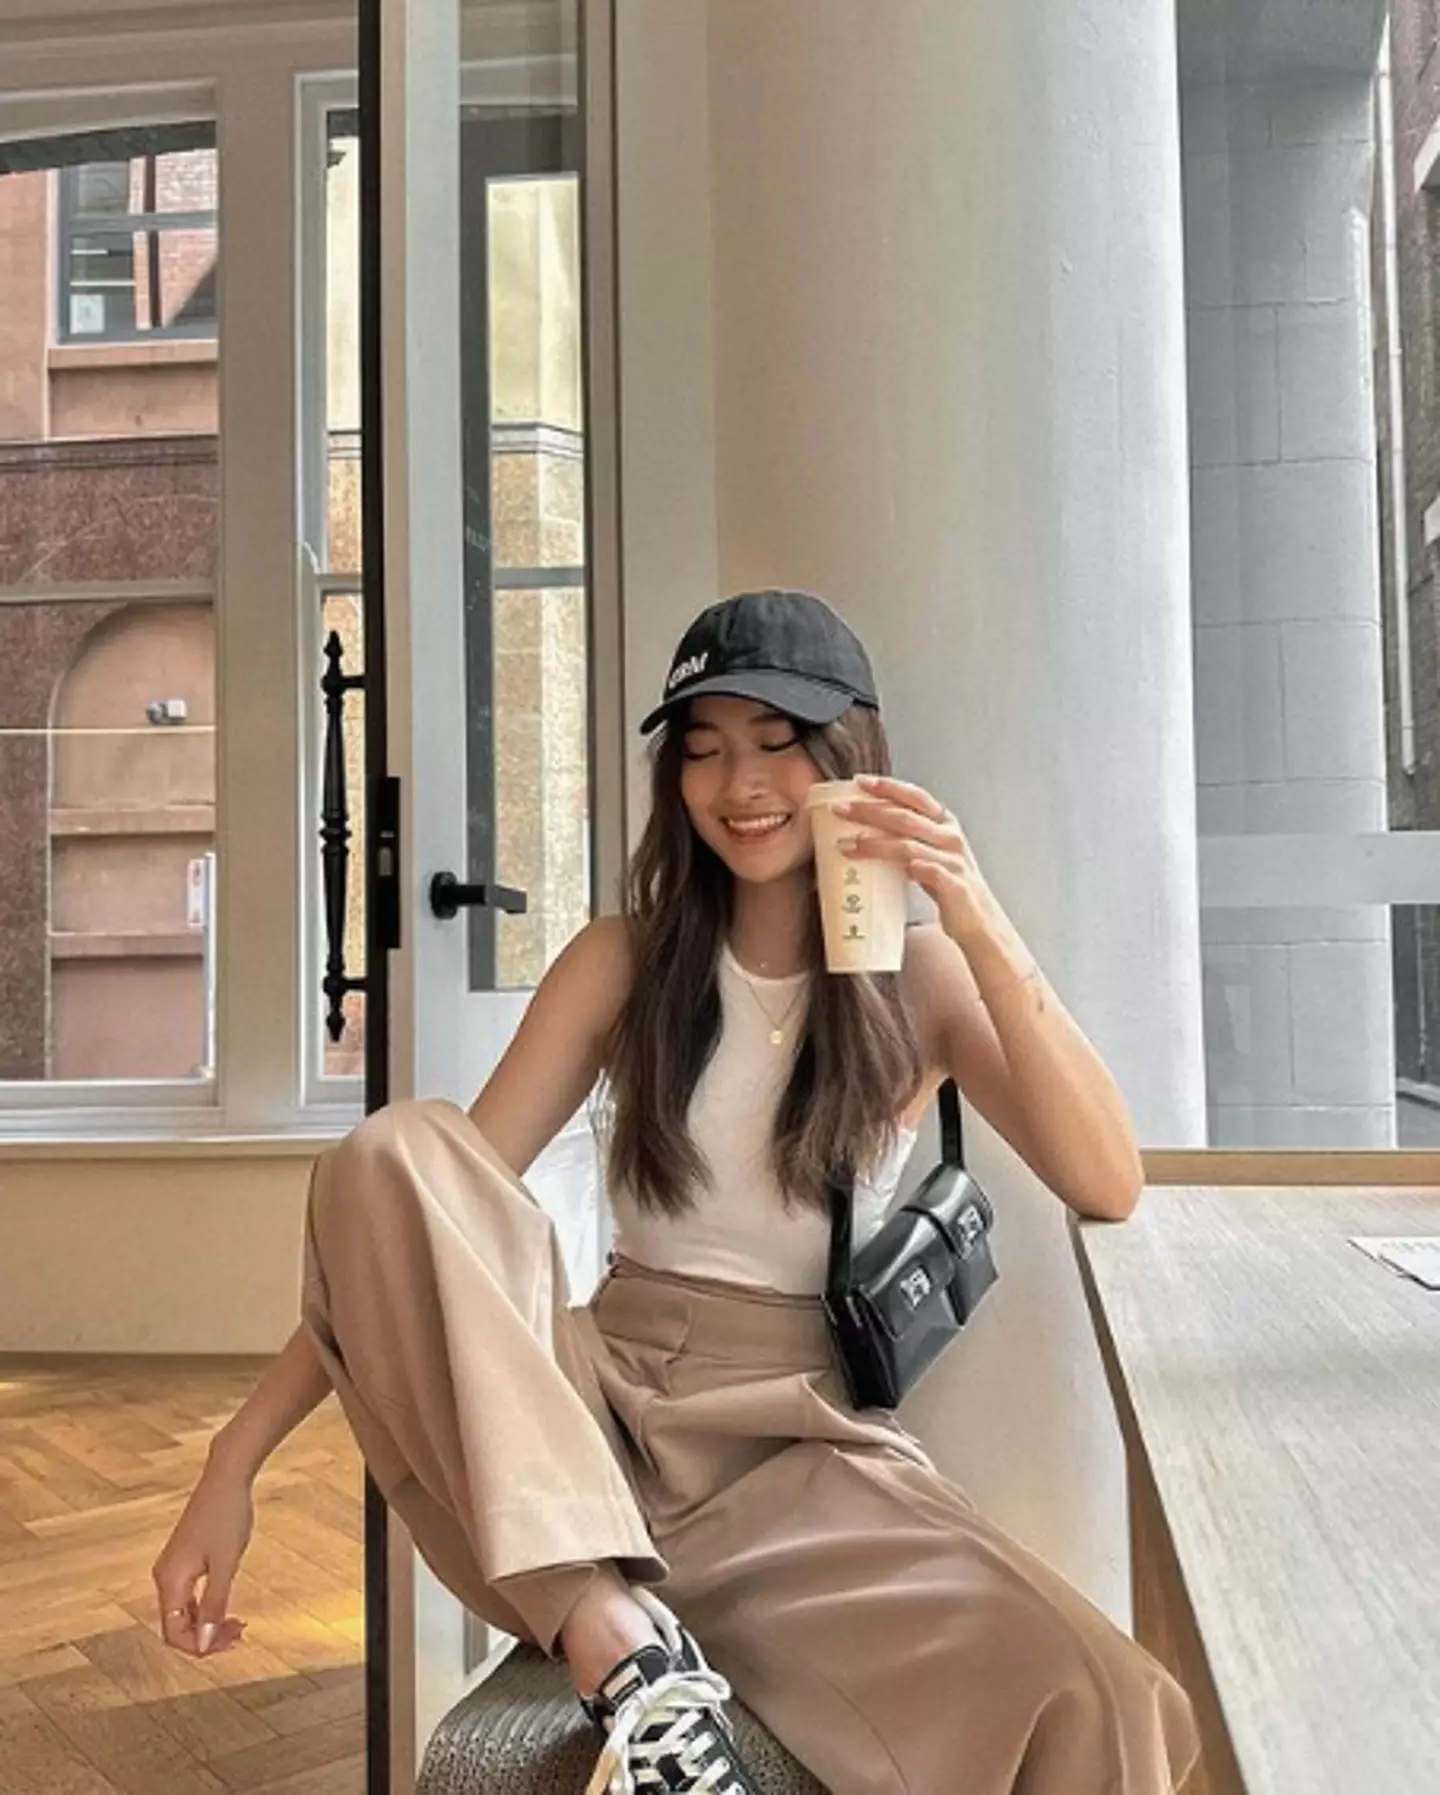 Chloe Zhu didn't tell her parents about her career shift for eight months.